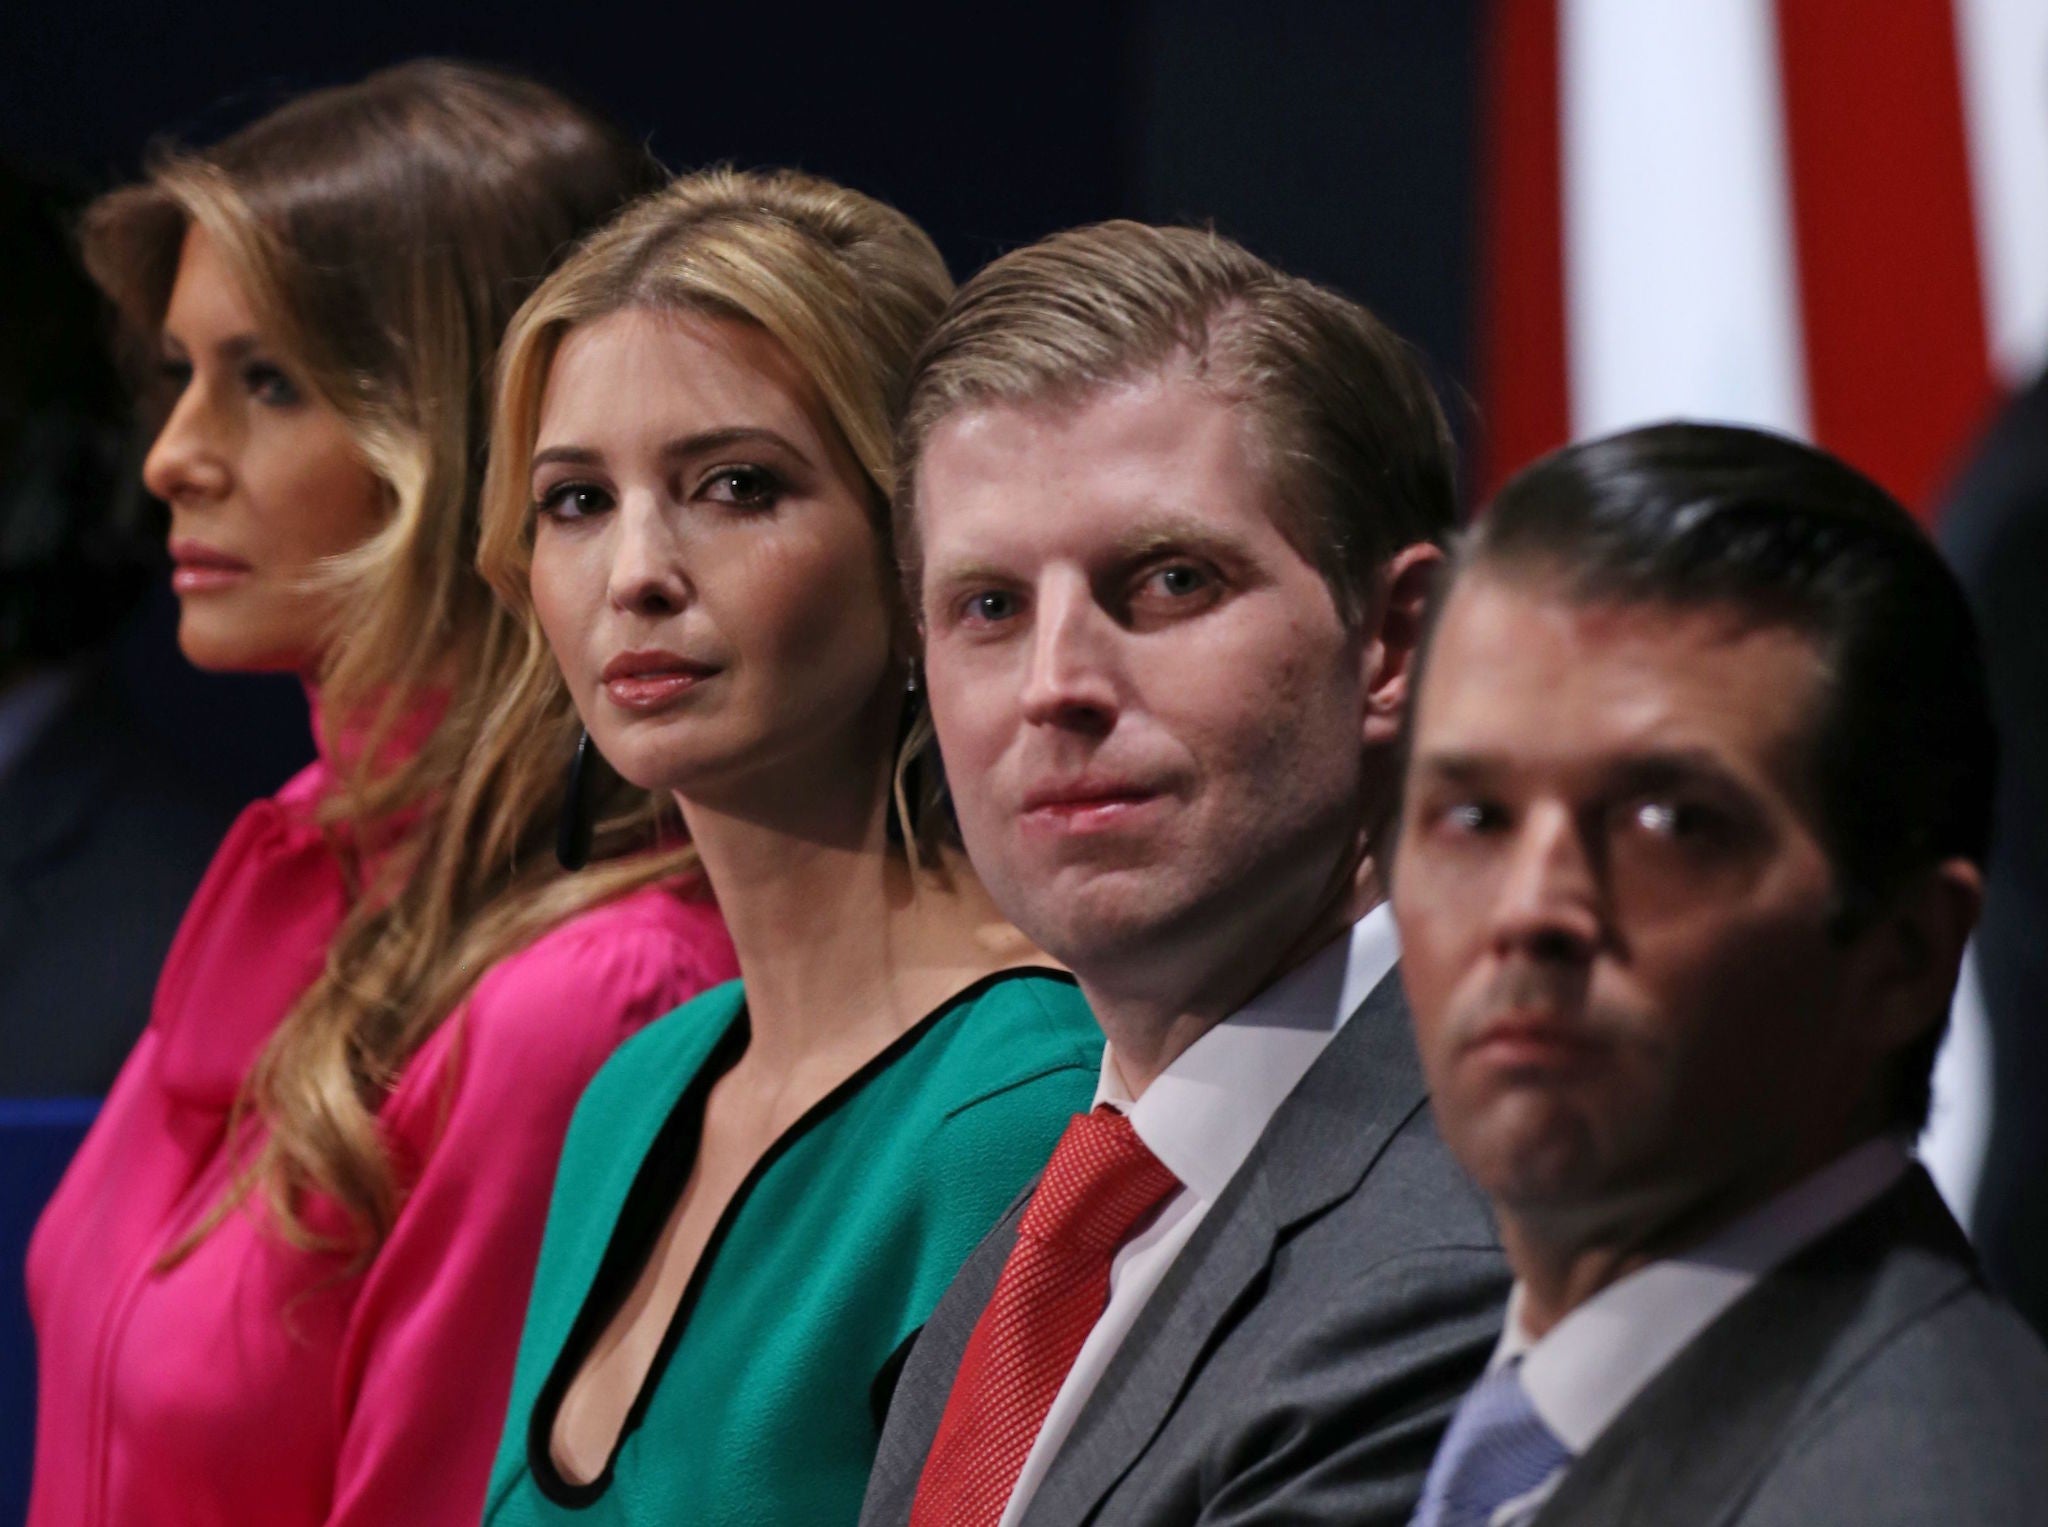 Eric Trump told Fox he will always be his father's 'cheerleader'